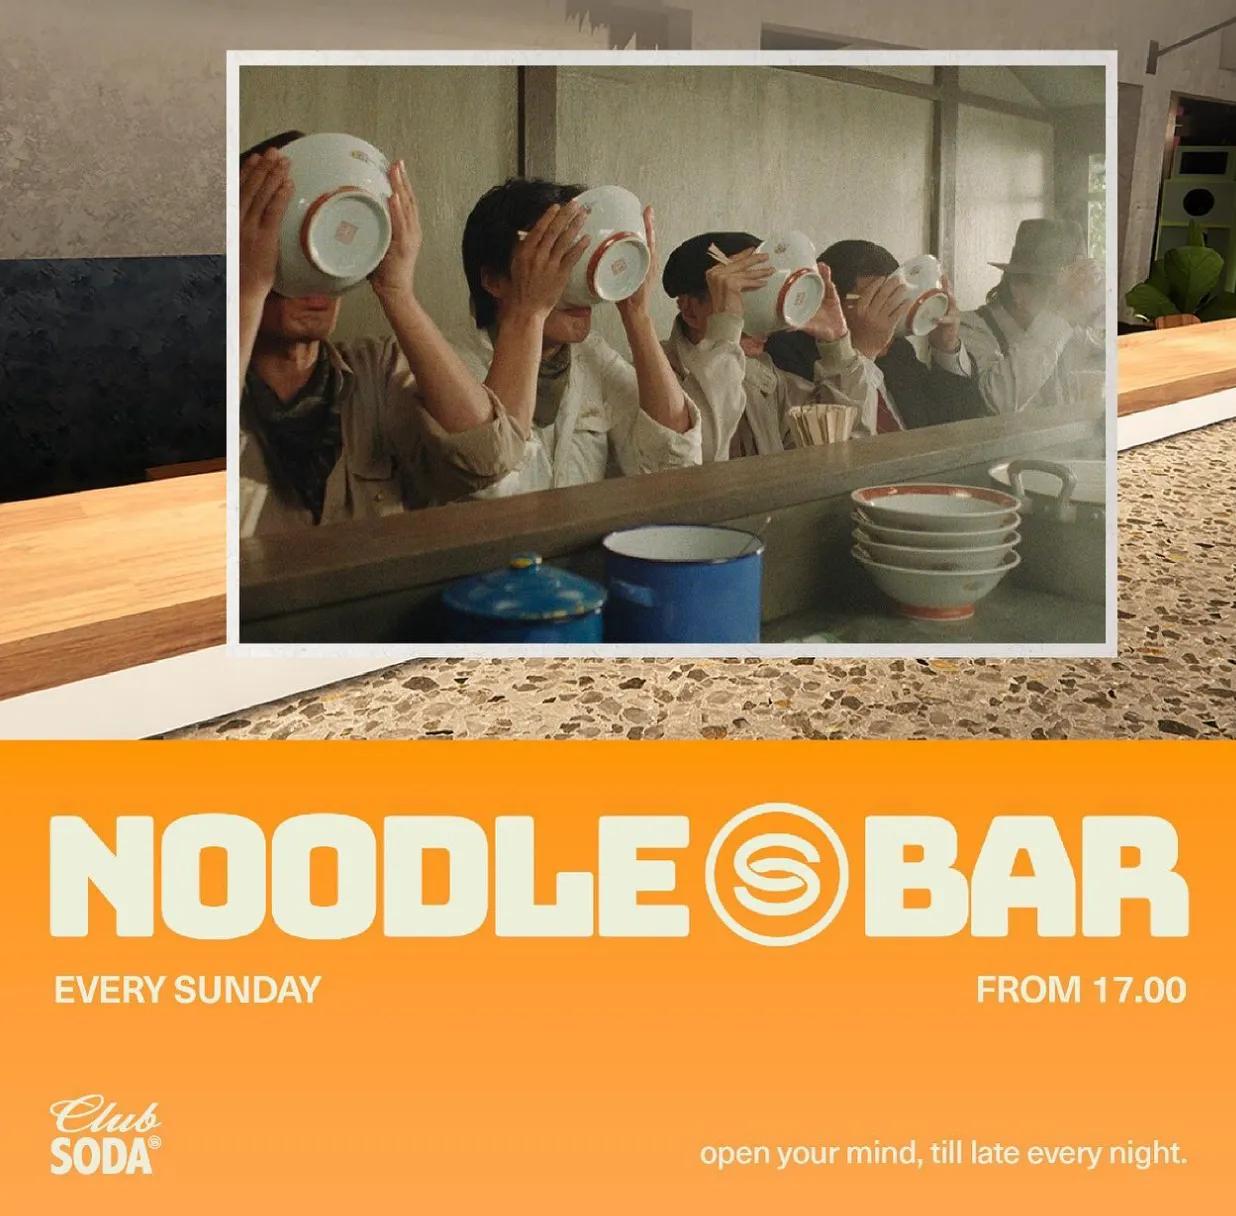 Event at Club Soda every Sunday 2024: Noodle Bar